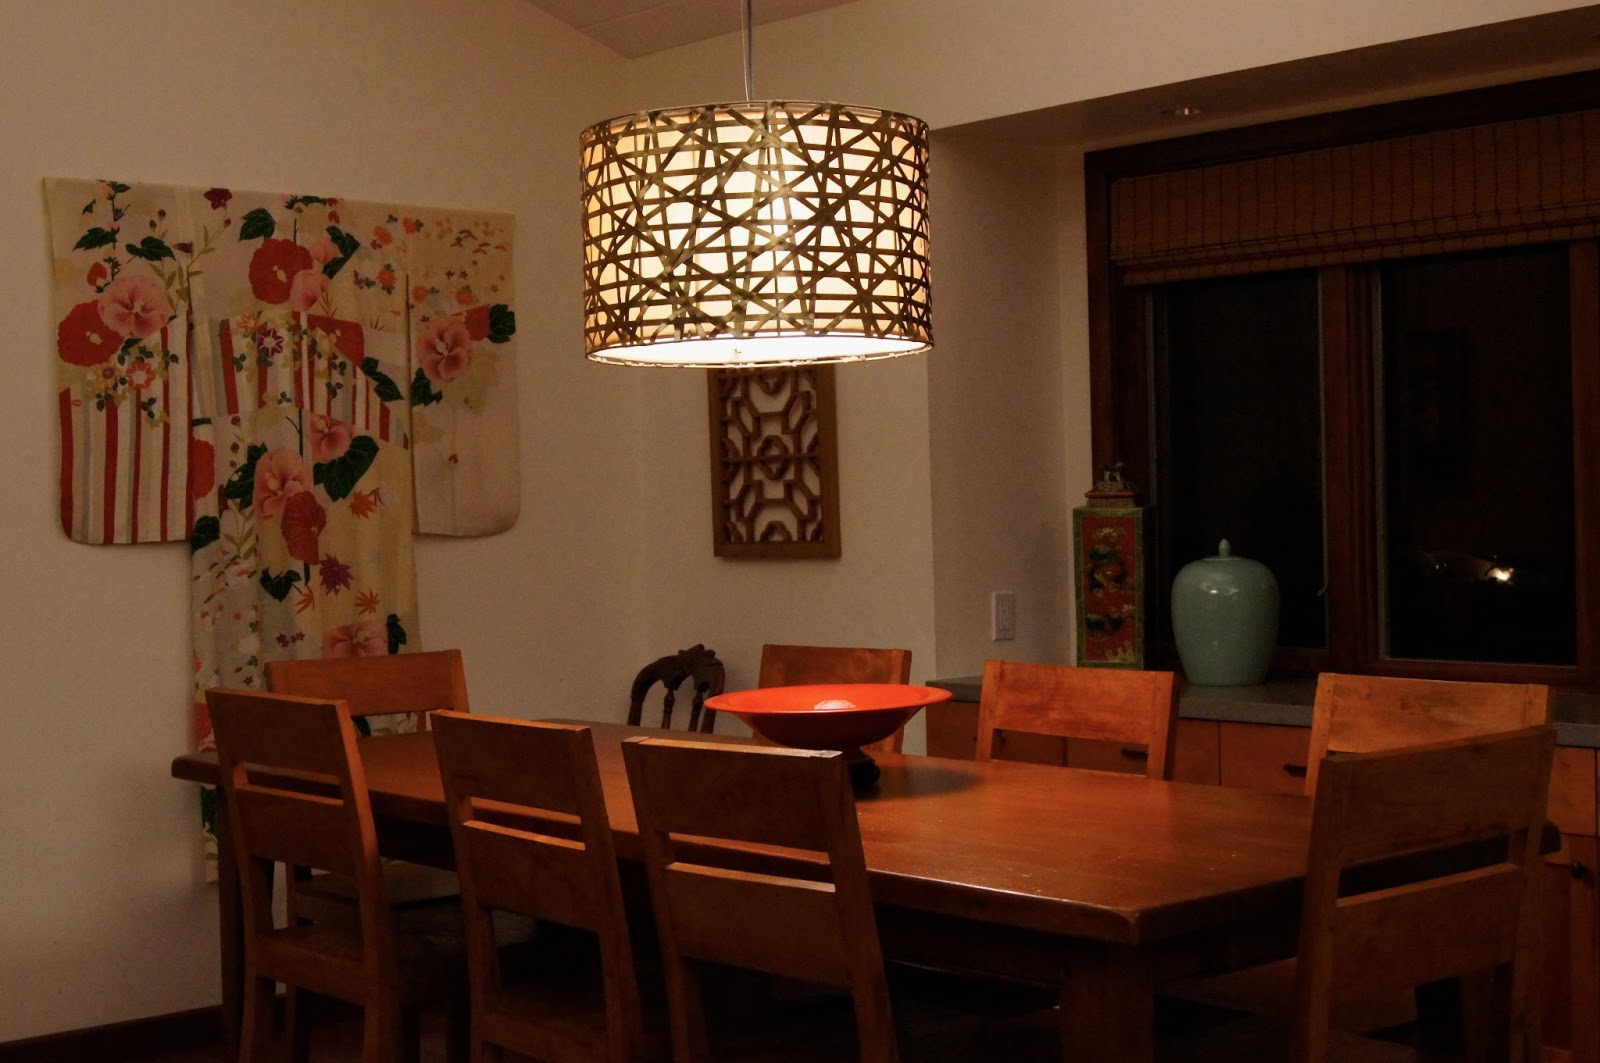 Price Style & Design: New Dining Room Light Fixture Installed!